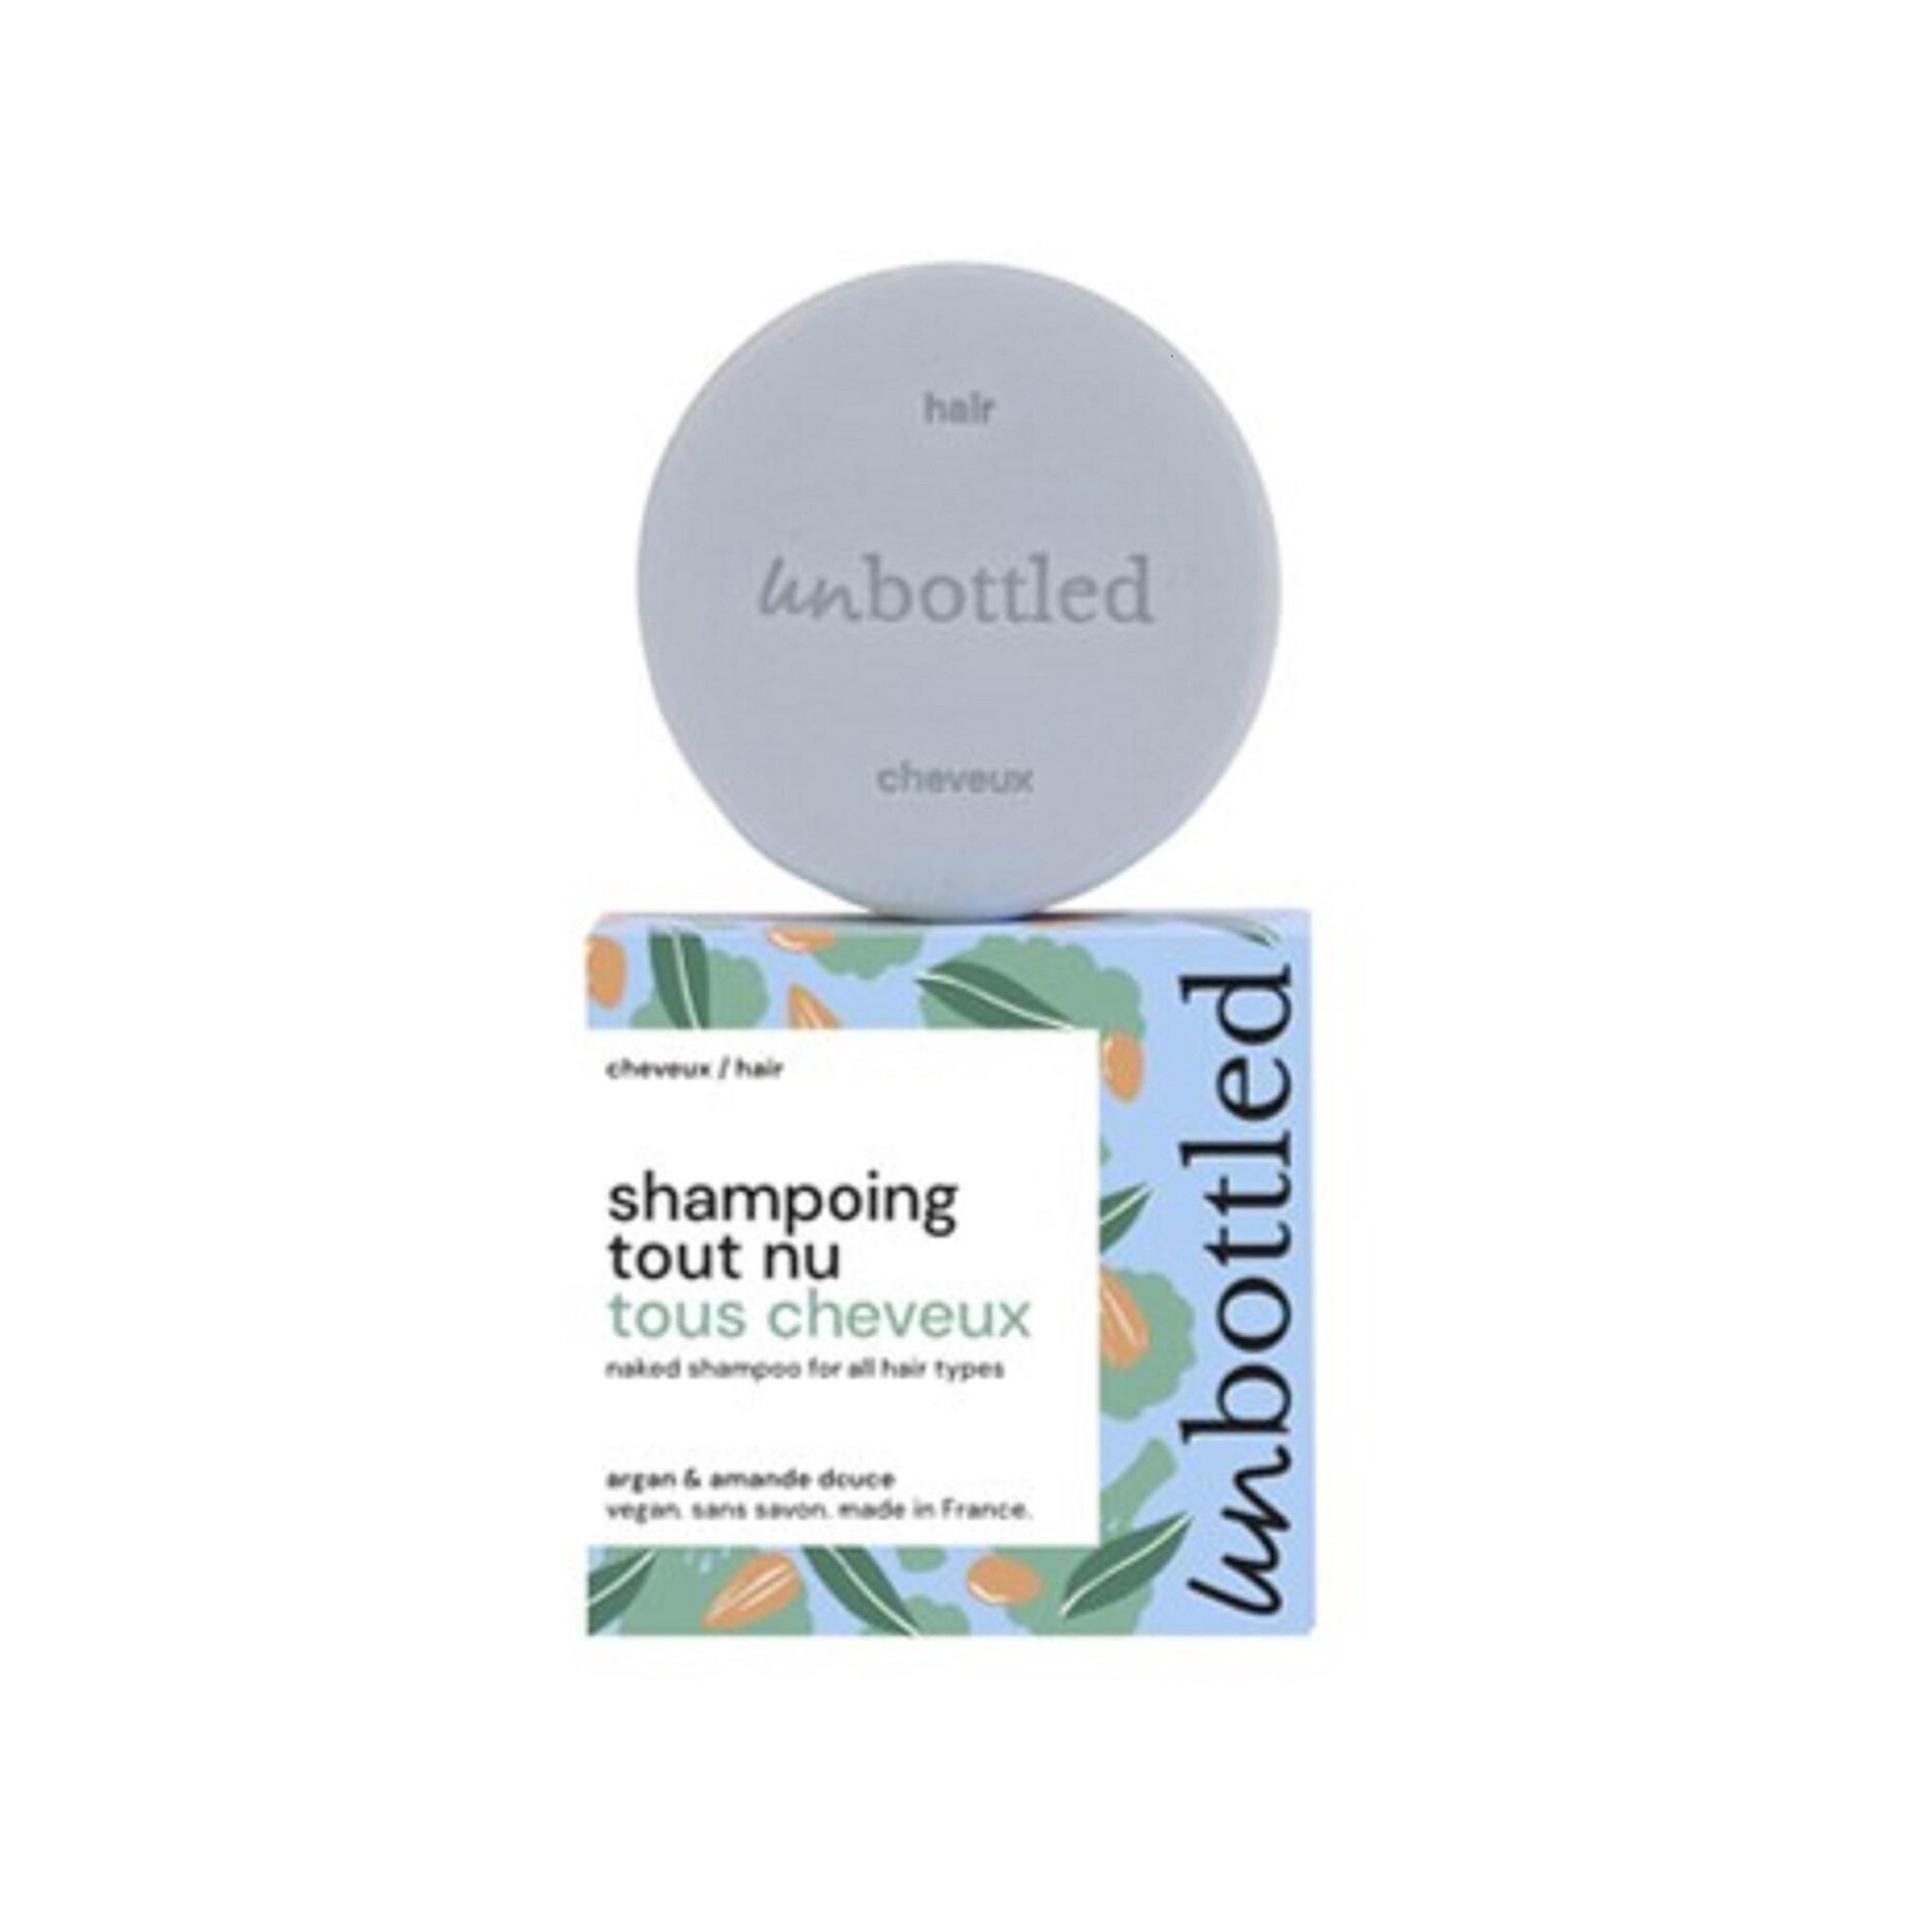 UNBOTTLED  Shampoing Tout Nu - Cheveux Normaux Amande 